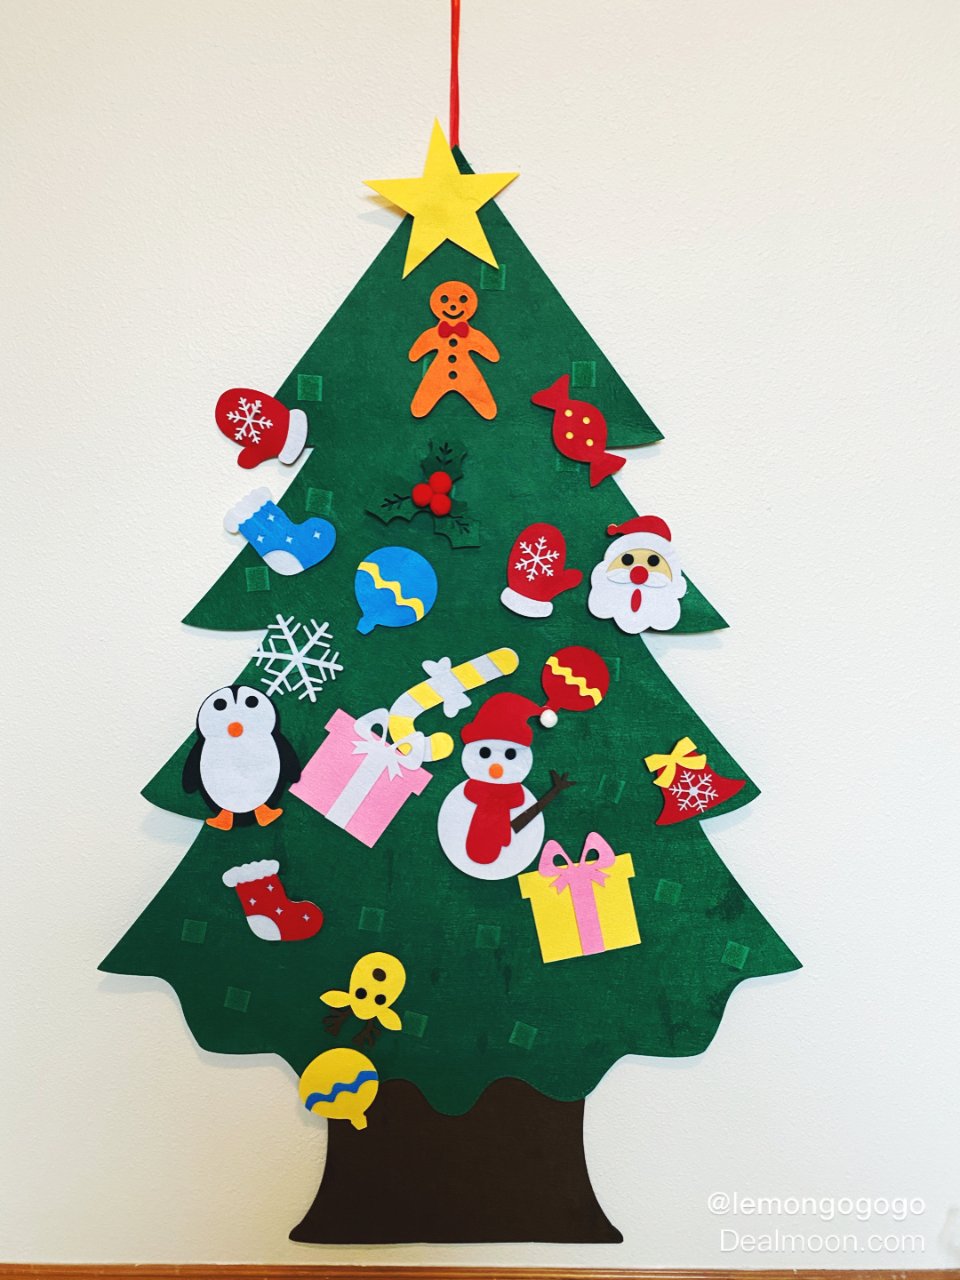 DIY Felt Christmas Tree, Set with 30PCS Ornaments Home Decorations, Wall Hanging Xmas Children's Felt Craft Kits for Kids Set New Year Gifts Party Supplies（3.3x2.1ft） : Toys & Games